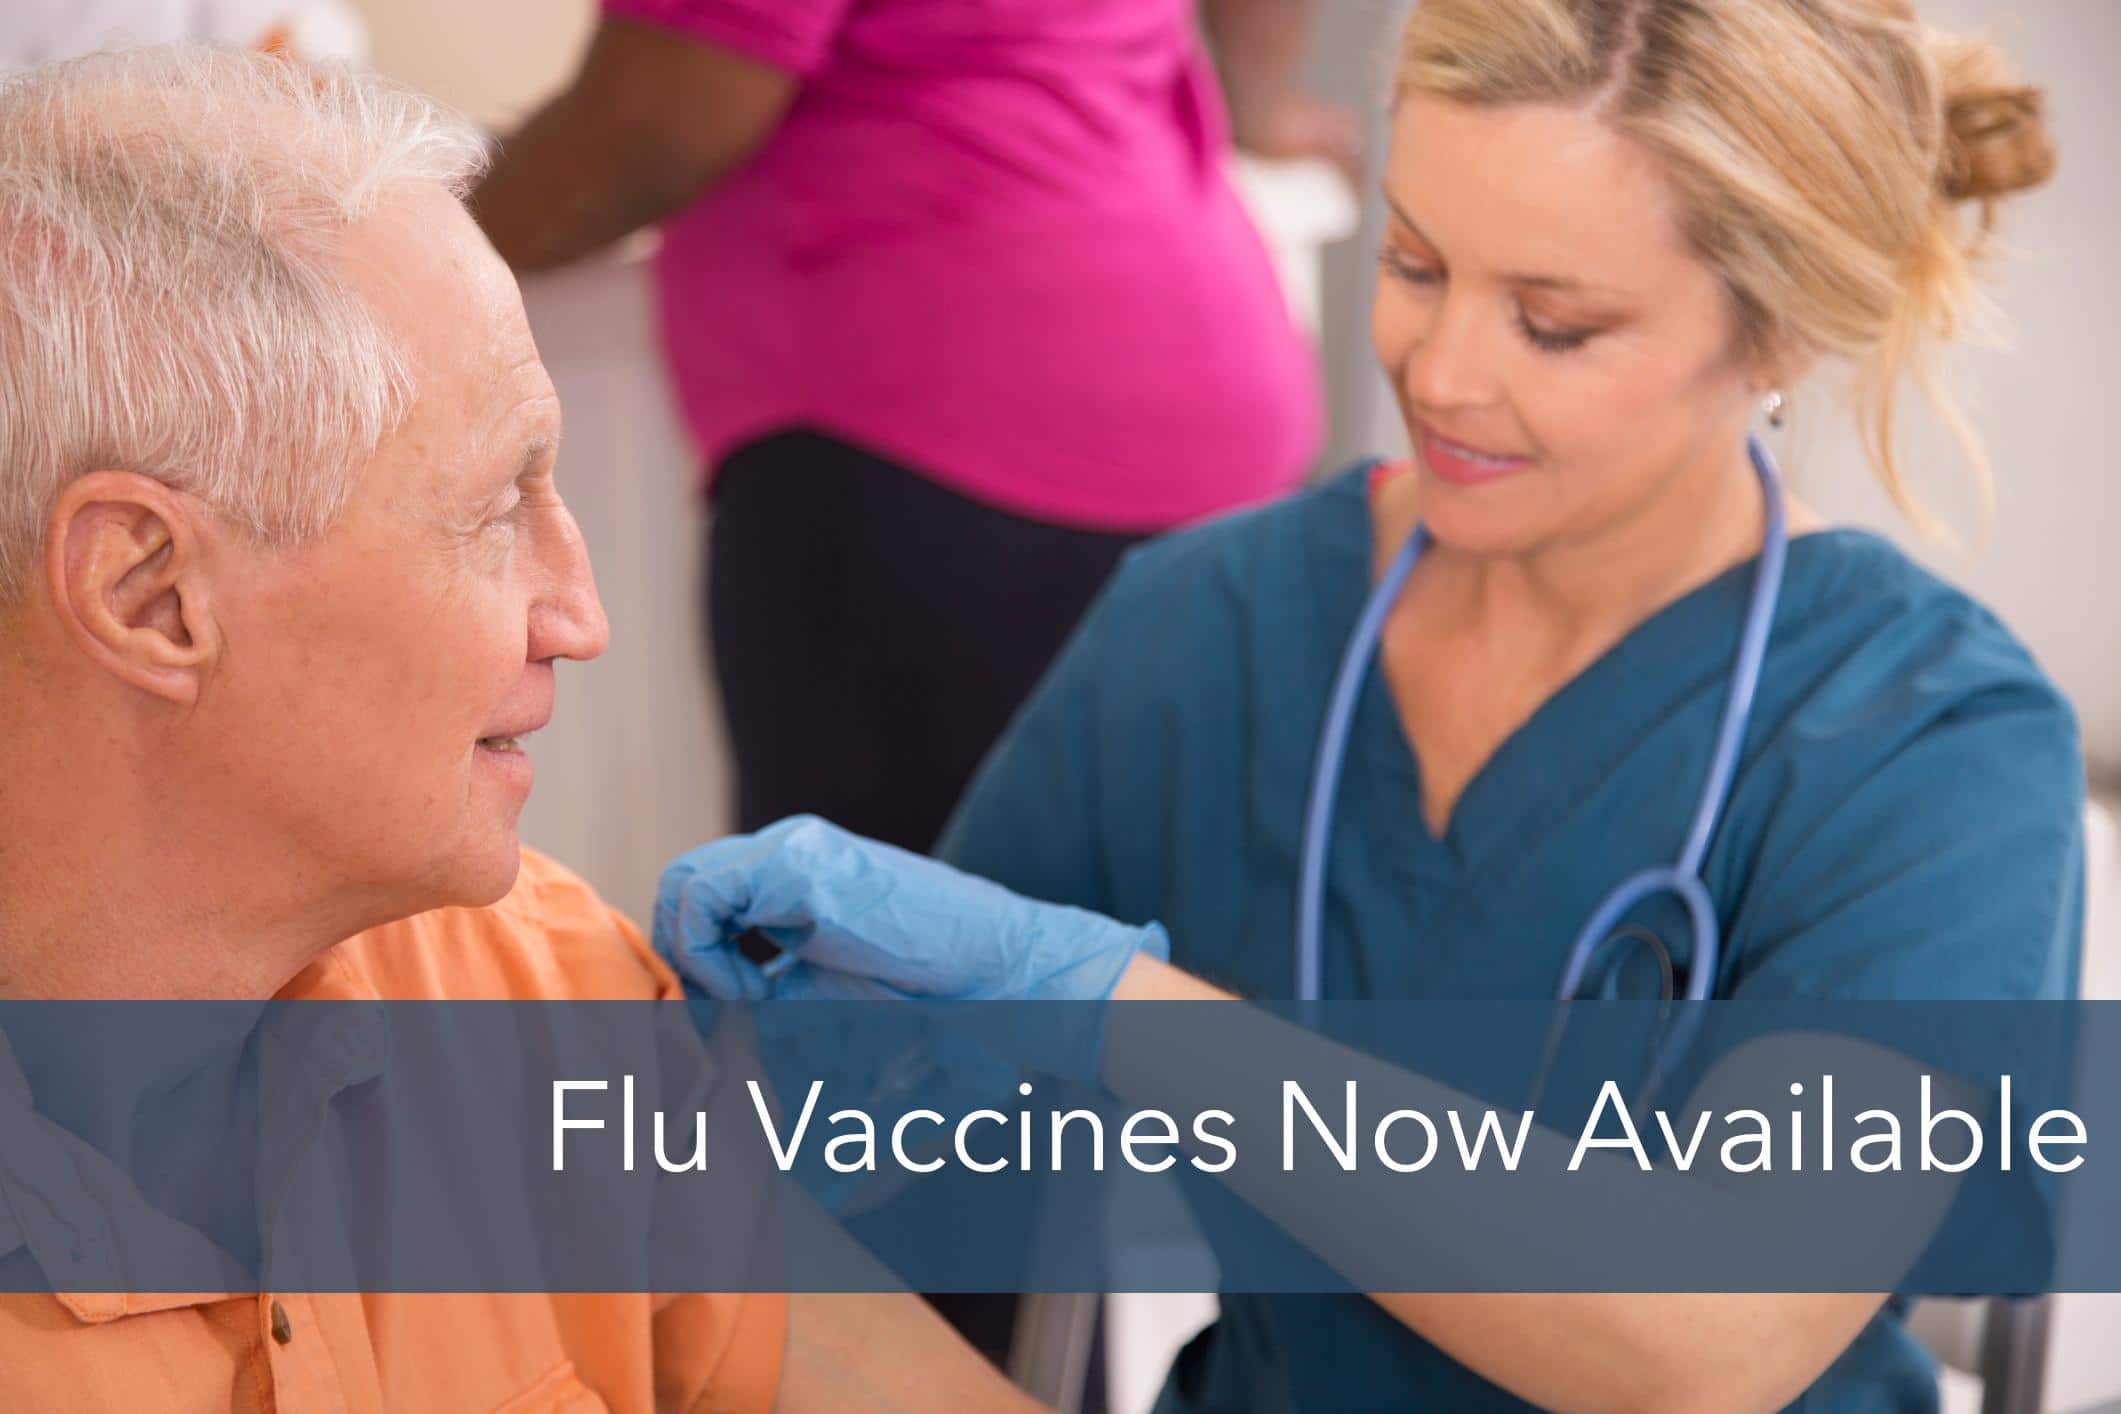 Click the image to learn more about Flu vaccine available now at multiple clinic locations